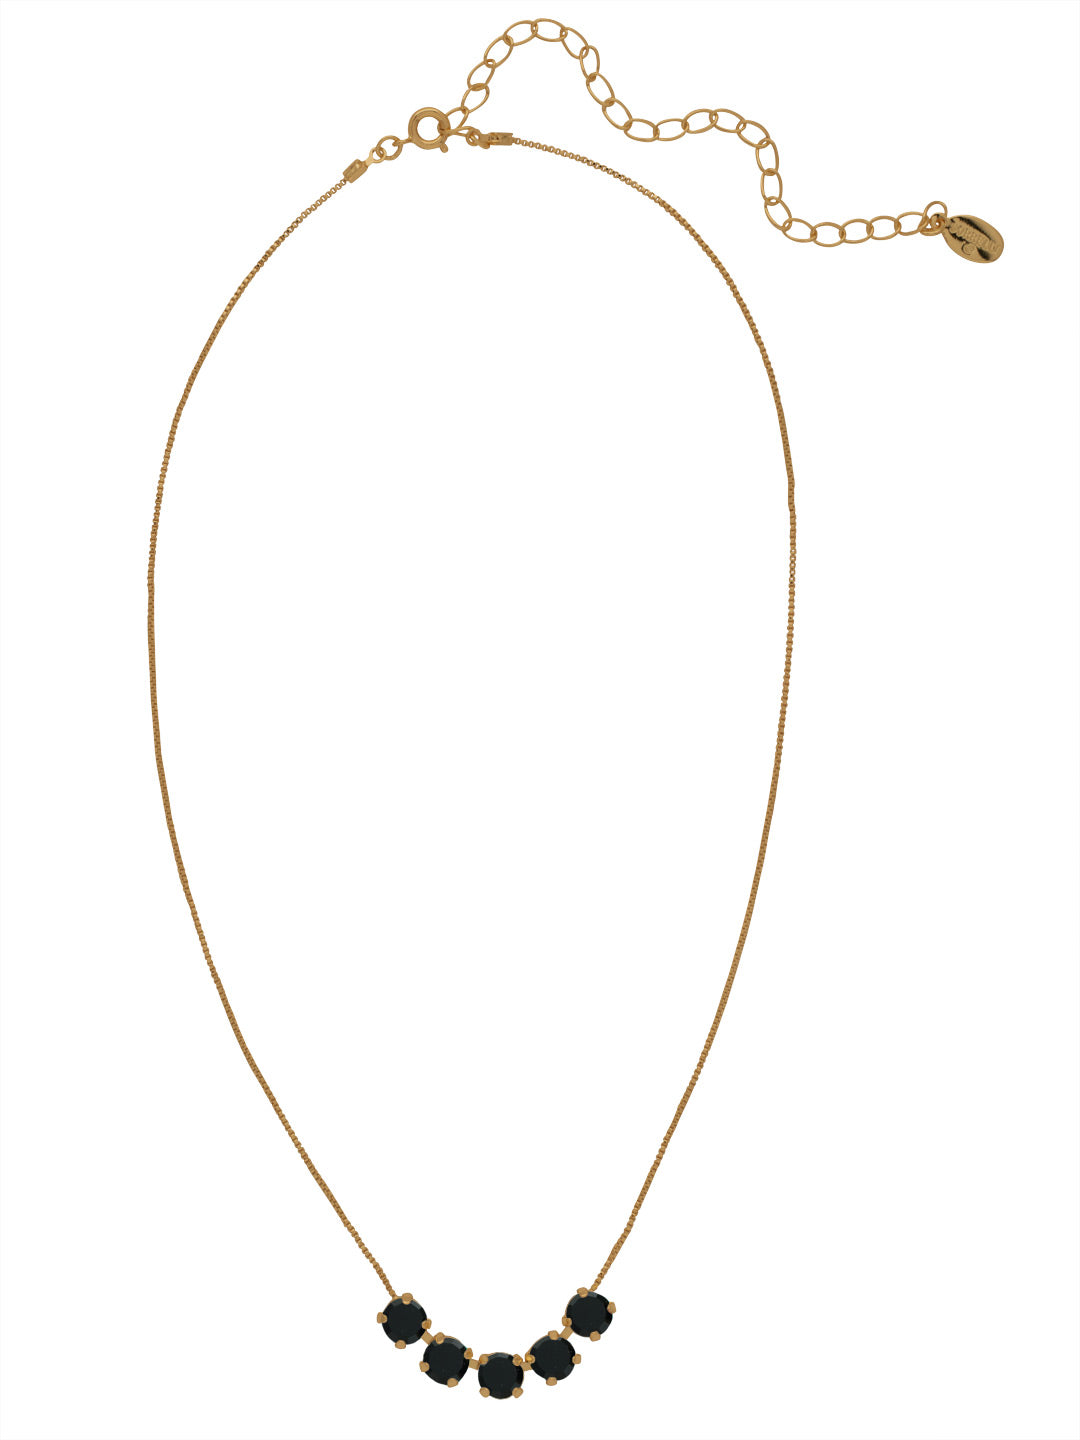 Shaughna Tennis Necklace - NFC84AGJET - <p>The Shaughna Tennis Necklace features five crystals on a delicate adjustable chain. From Sorrelli's Jet collection in our Antique Gold-tone finish.</p>